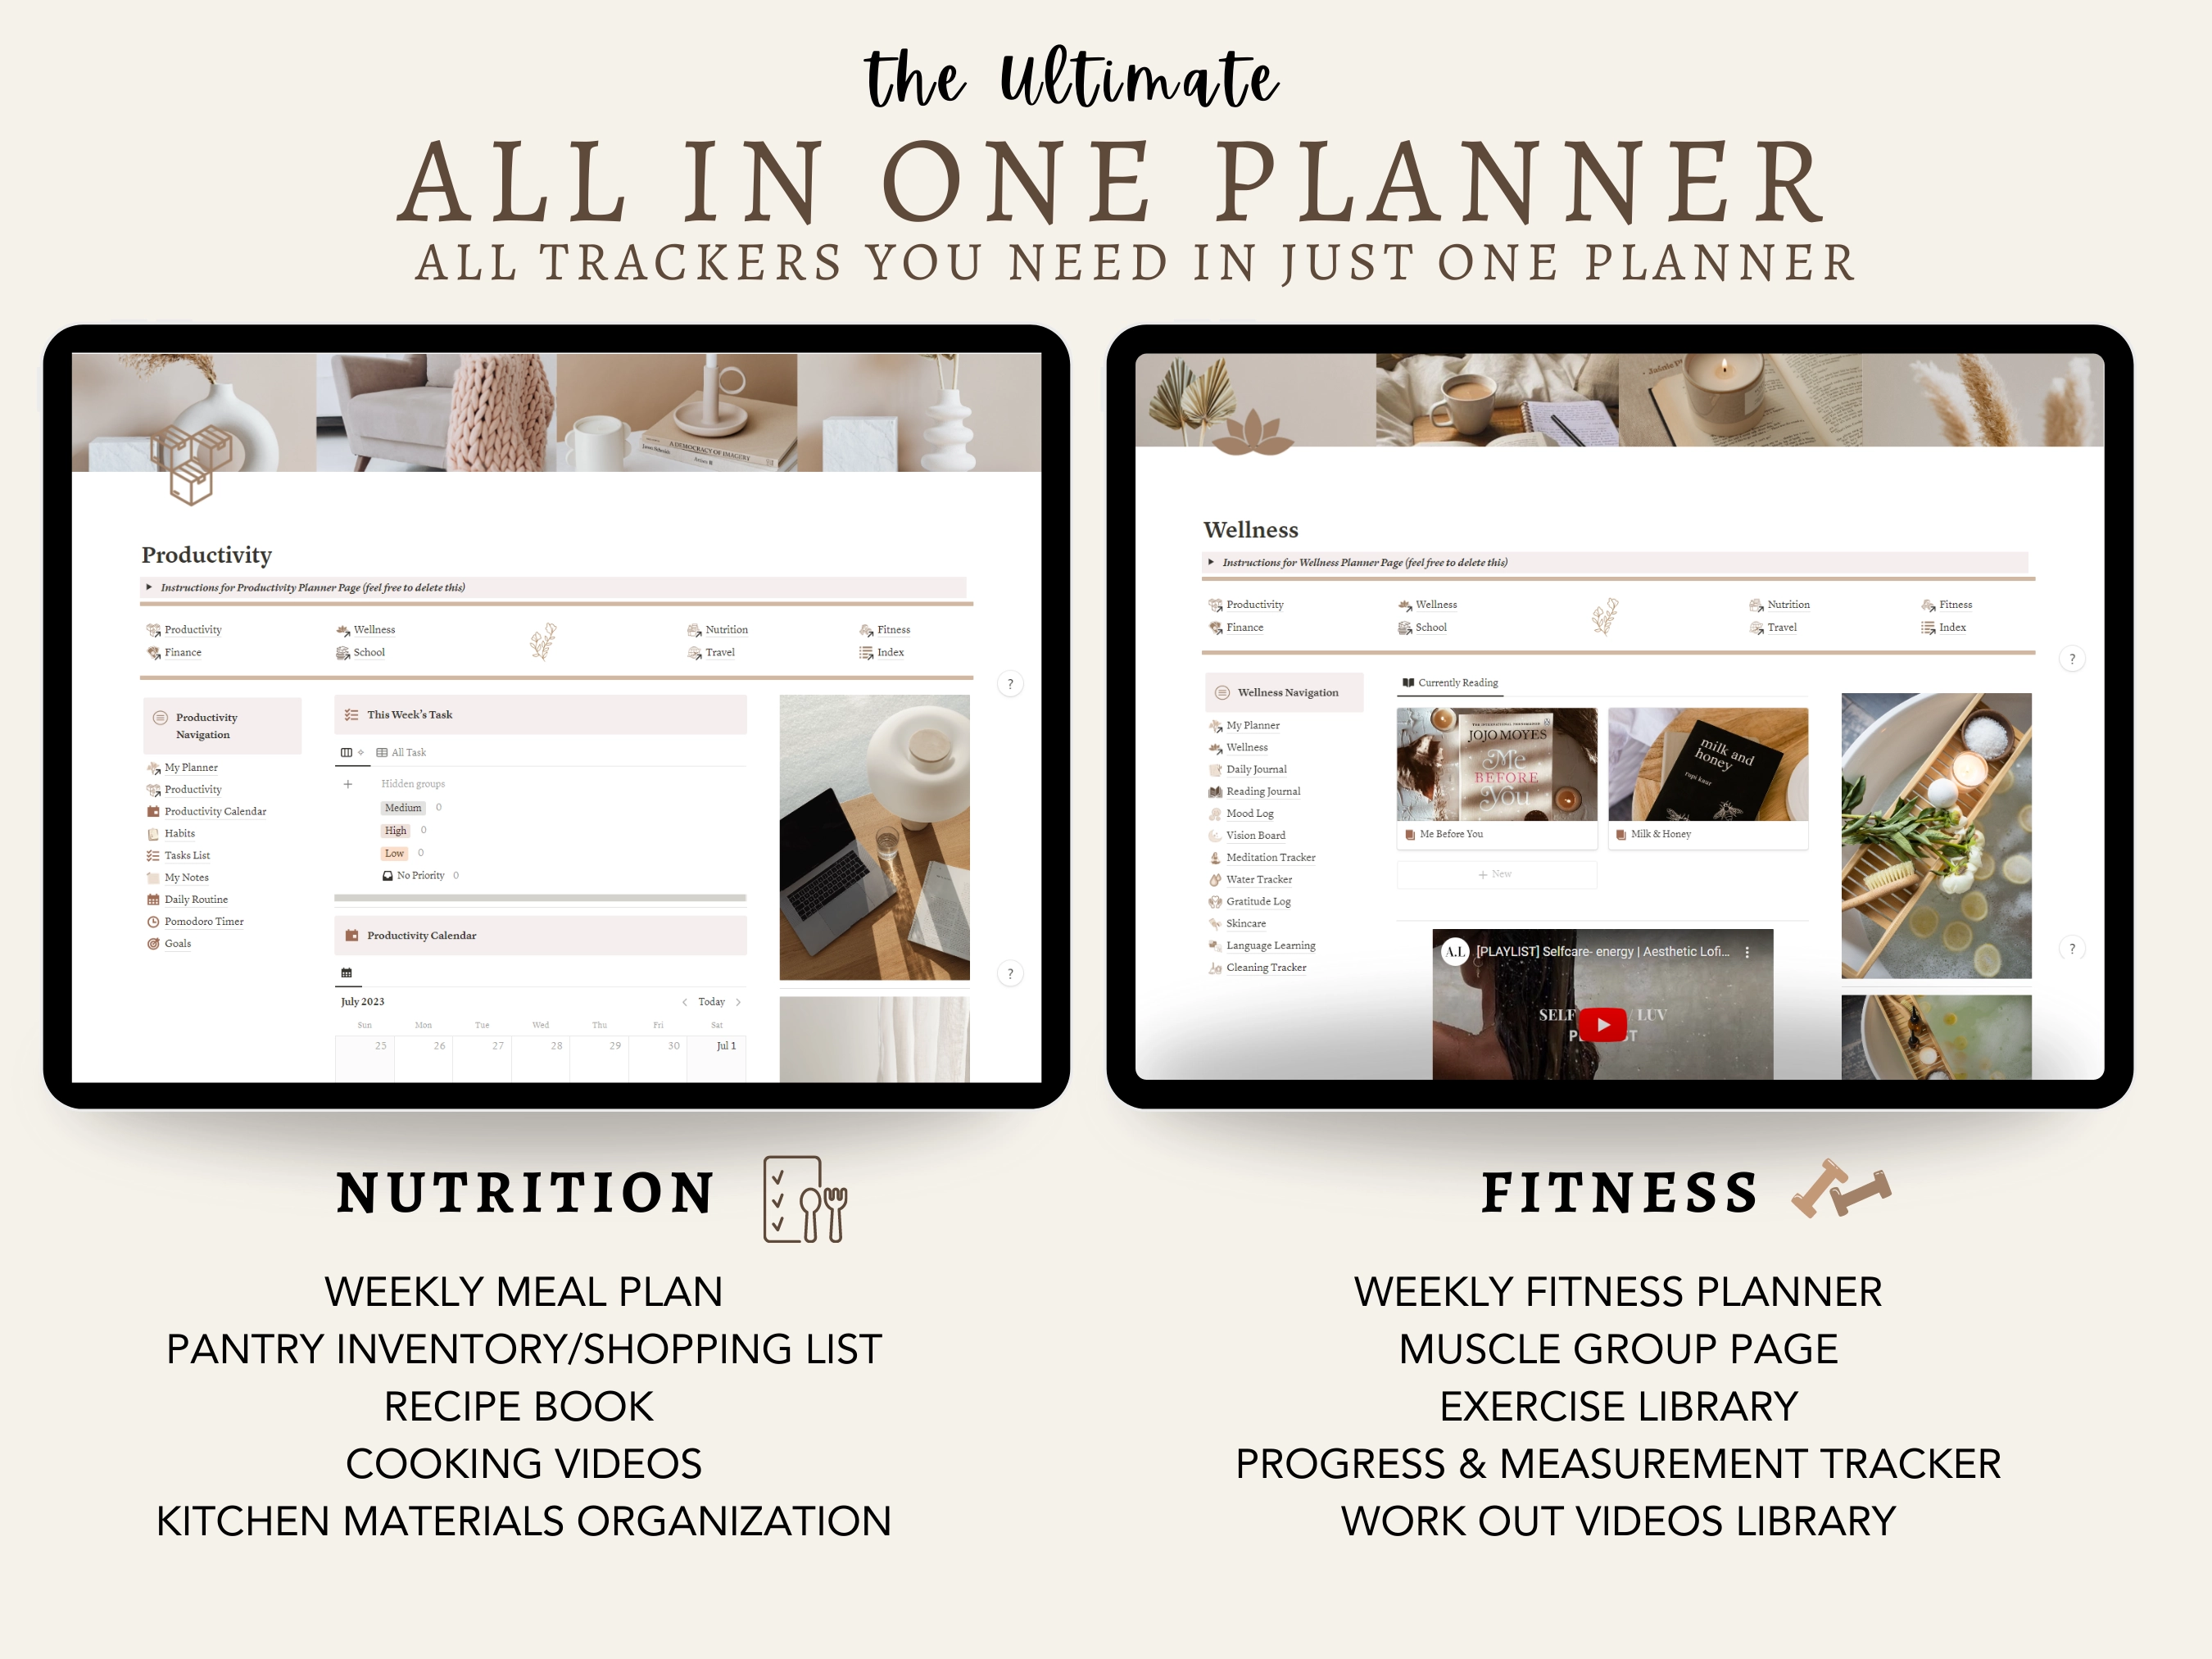 All In One Life Planner